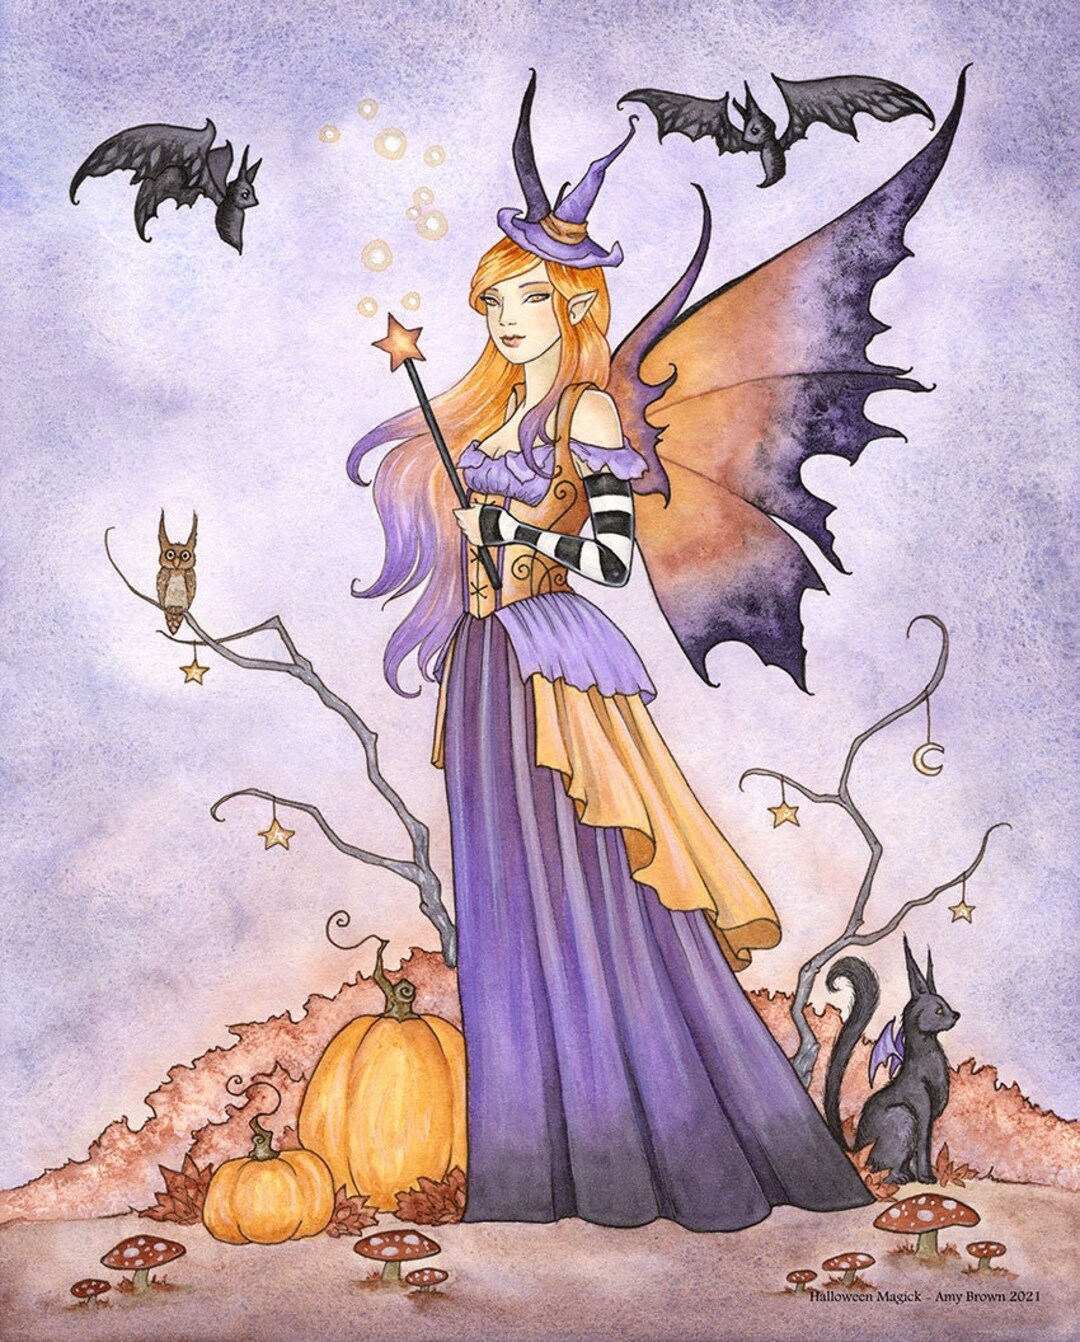 SIGNED 8x10 PRINT Halloween Magick Fairy by Amy Brown - Etsy